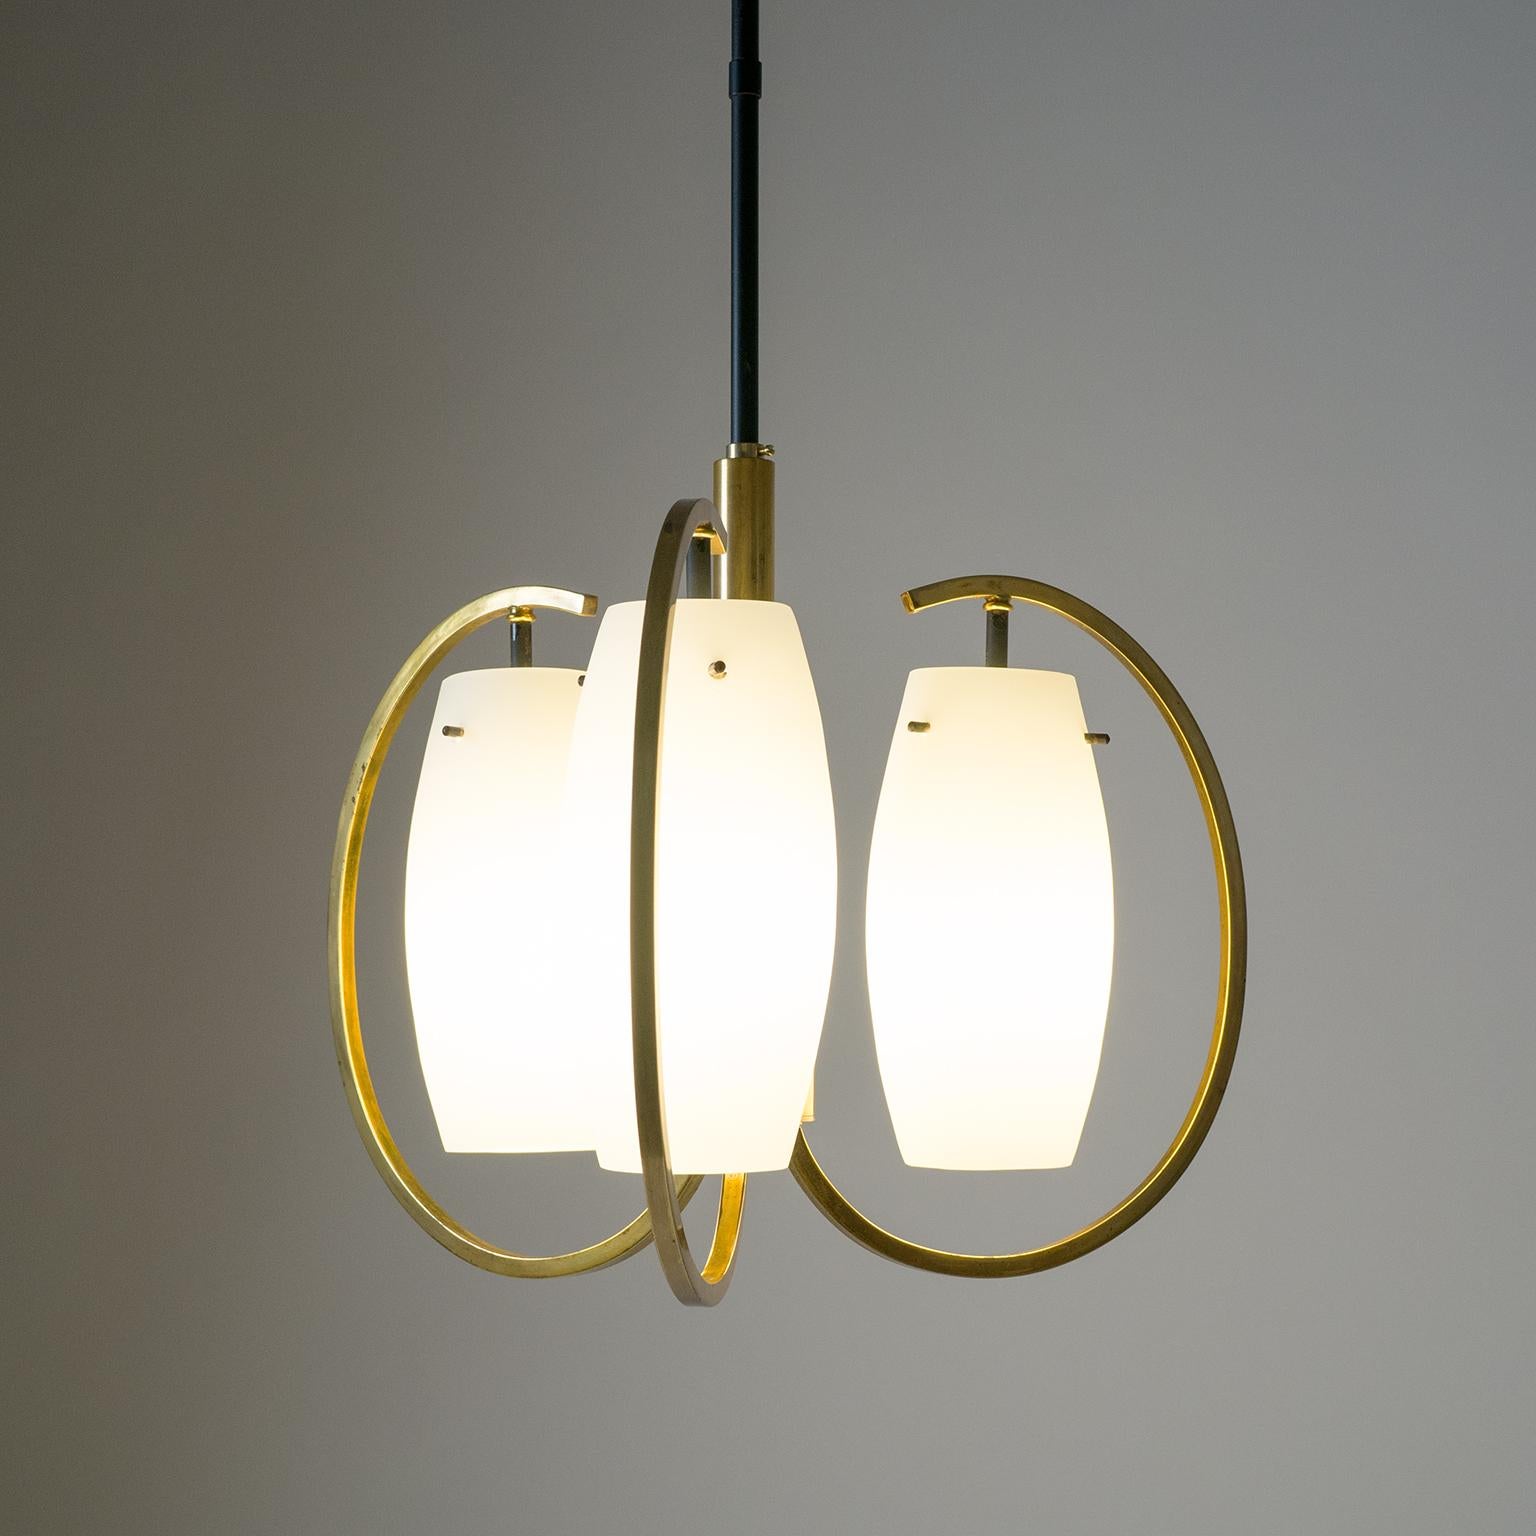 Lacquered Italian Chandelier, 1950s, Satin Glass and Brass